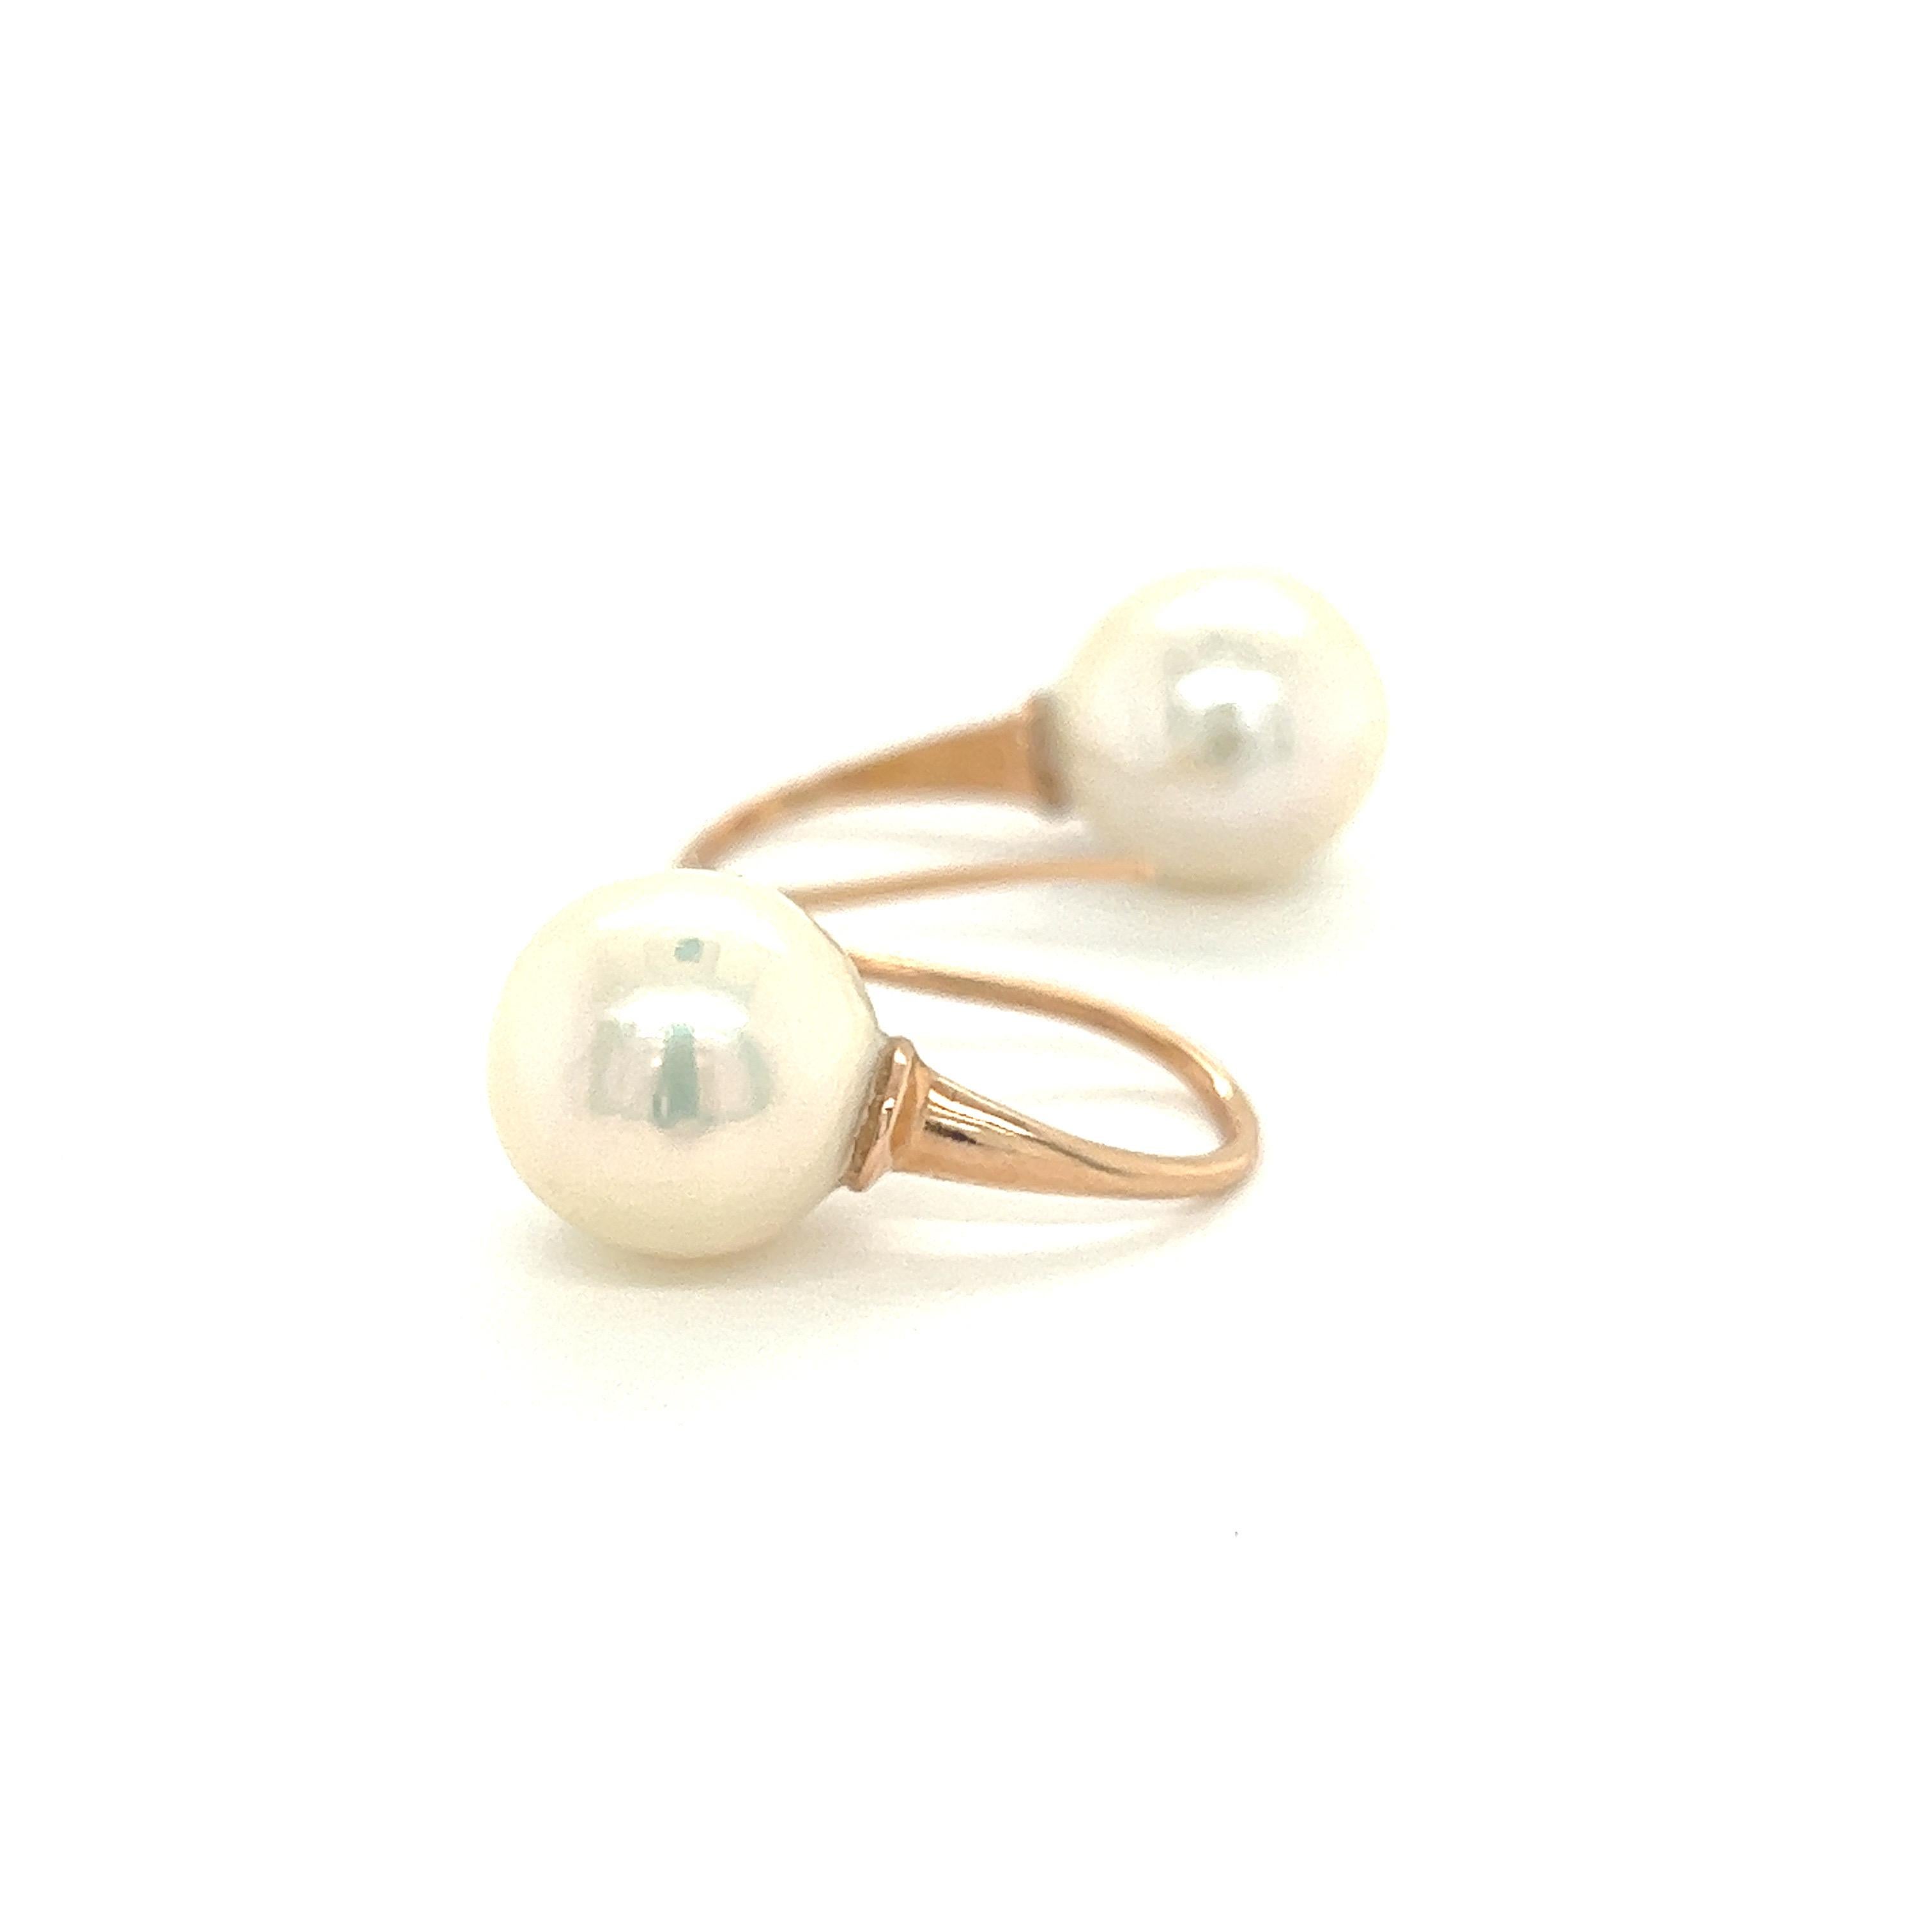 Earrings Baroque Pearls Rose Gold 18 Karat

These beautiful earrings are made from baroque South Sea pearls, renowned for their timeless beauty and elegance. The pearls are carefully selected for their exceptional quality and lustre. The earrings